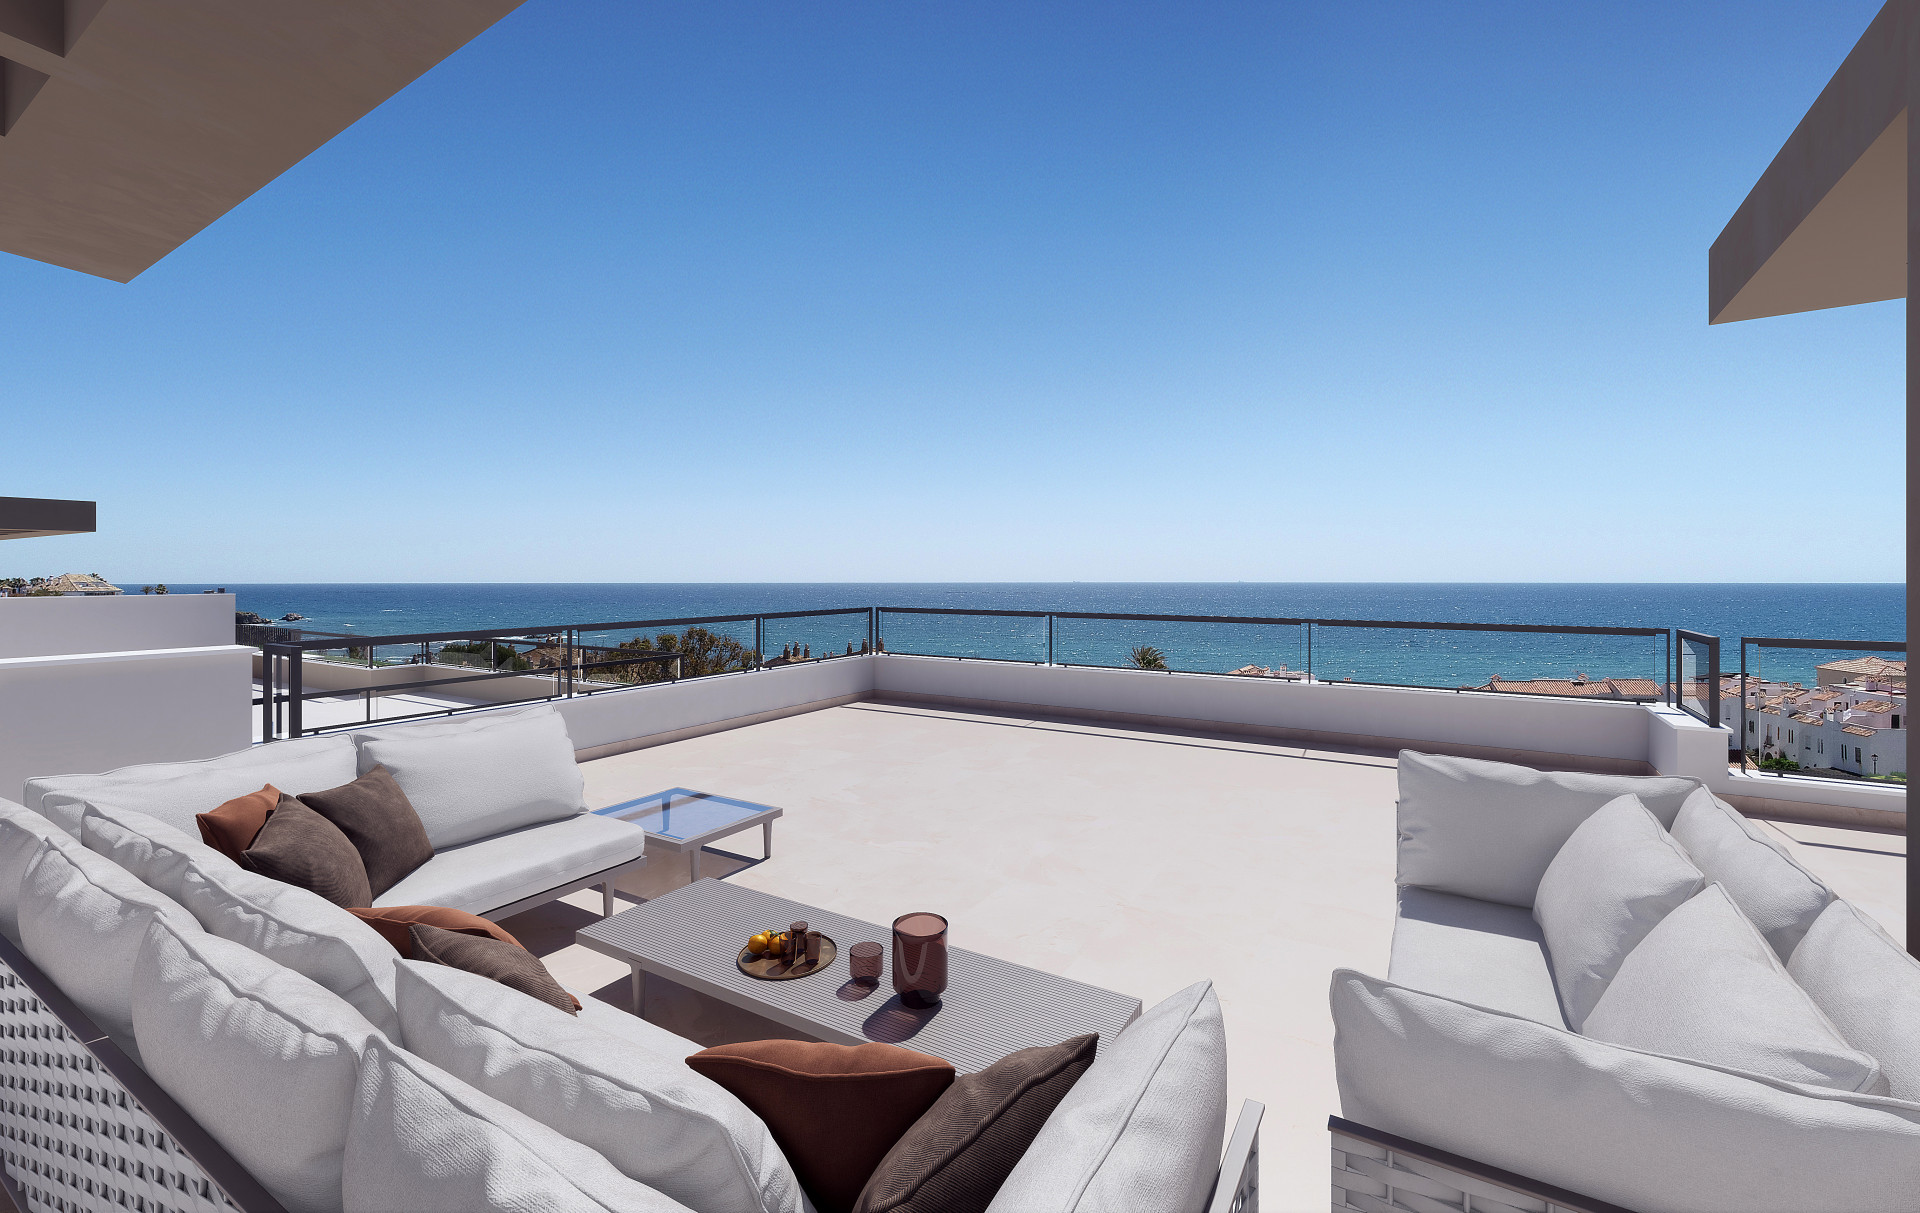 Solemar: Apartments with amazing seaviews in Casares Beach.